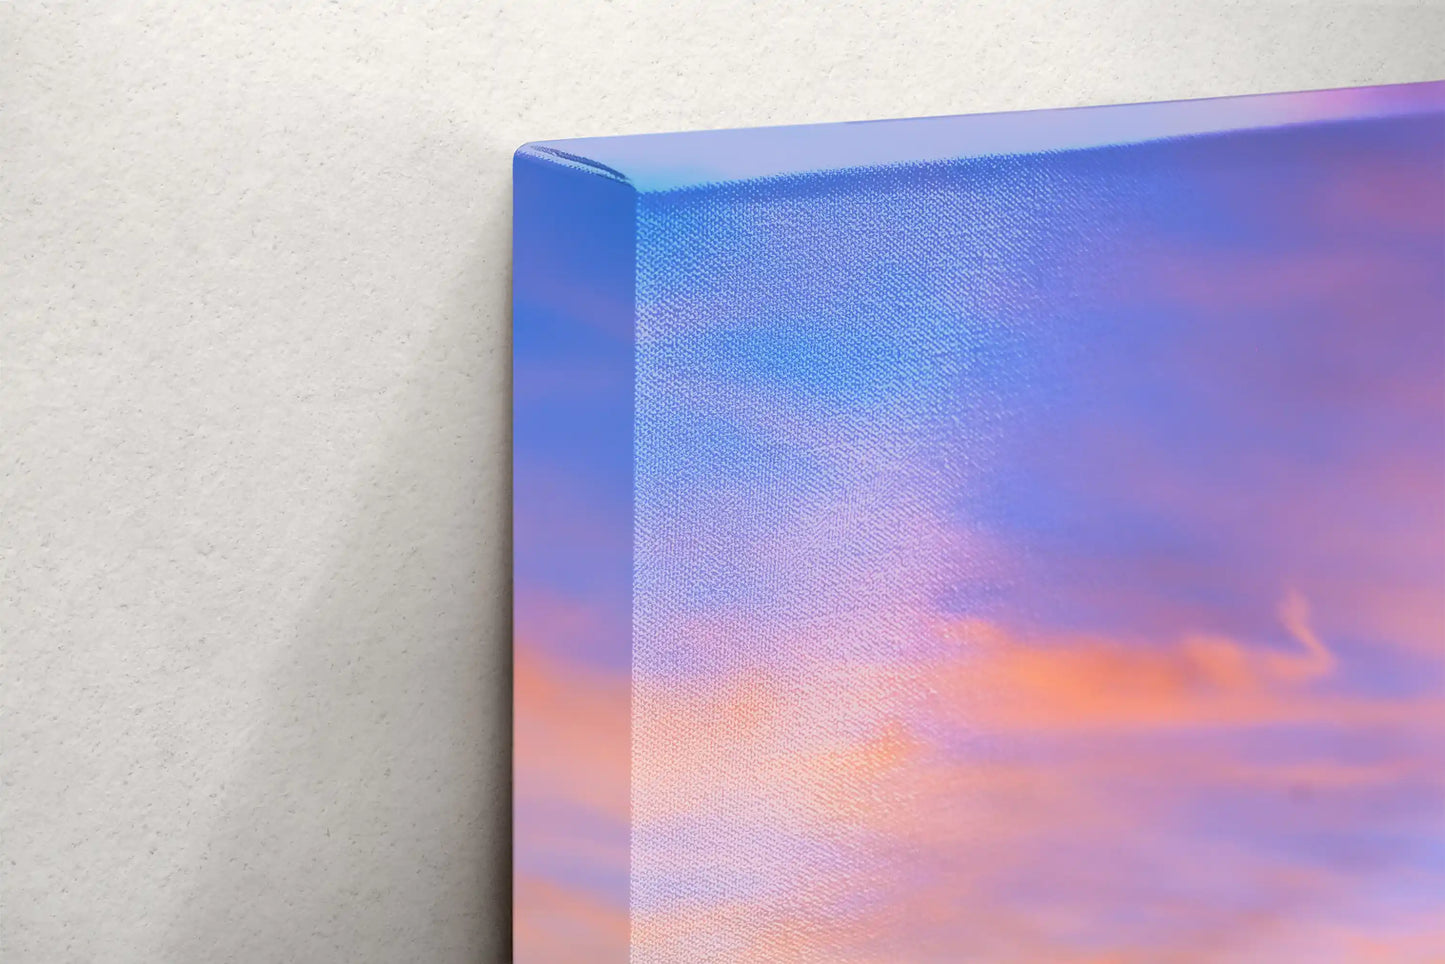 Edge of a canvas print showing a smooth transition of a Big Sur sunset with vibrant purple and orange hues.